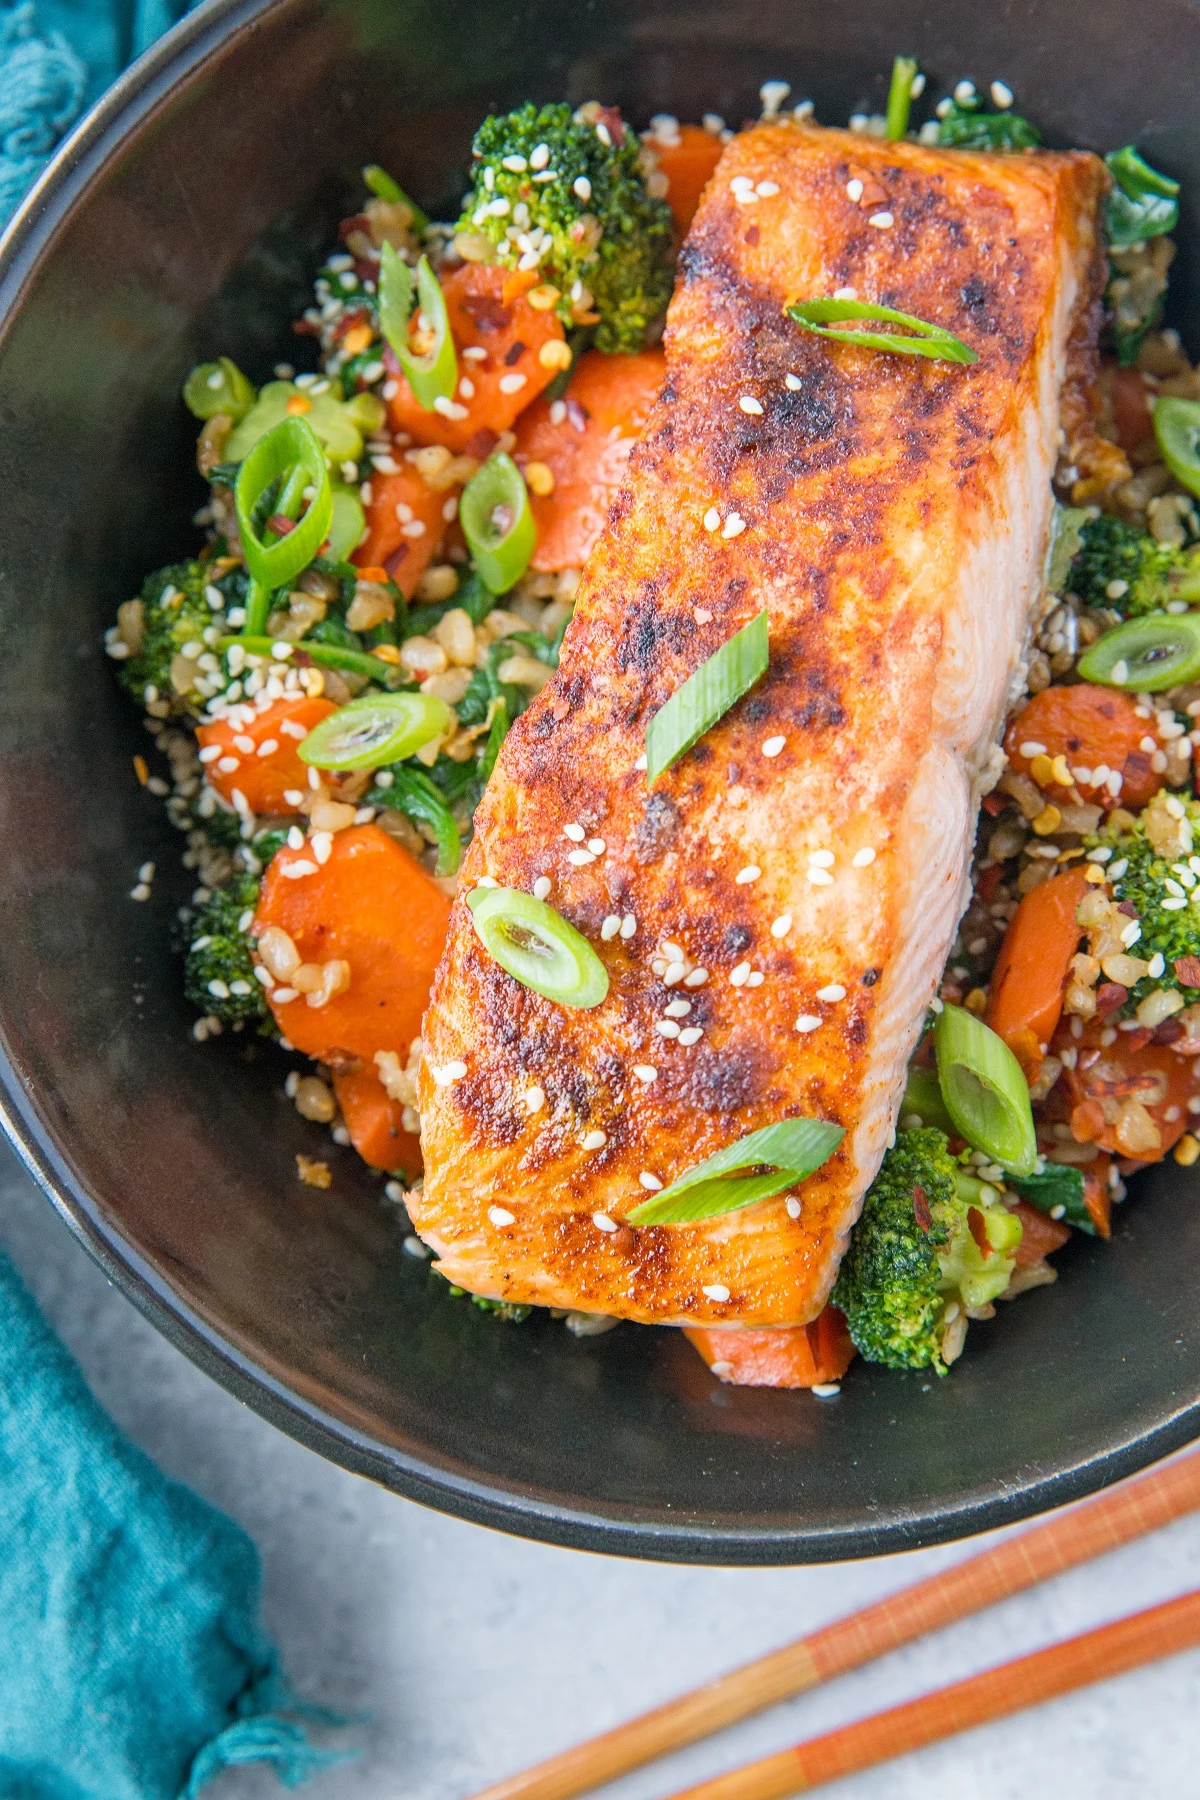 Crispy Paprika Salmon Bowls with Ginger Vegetables and Rice - a well-rounded, clean and filling meal that will nourish your body and soul! | TheRoastedRoot.com #glutenfree